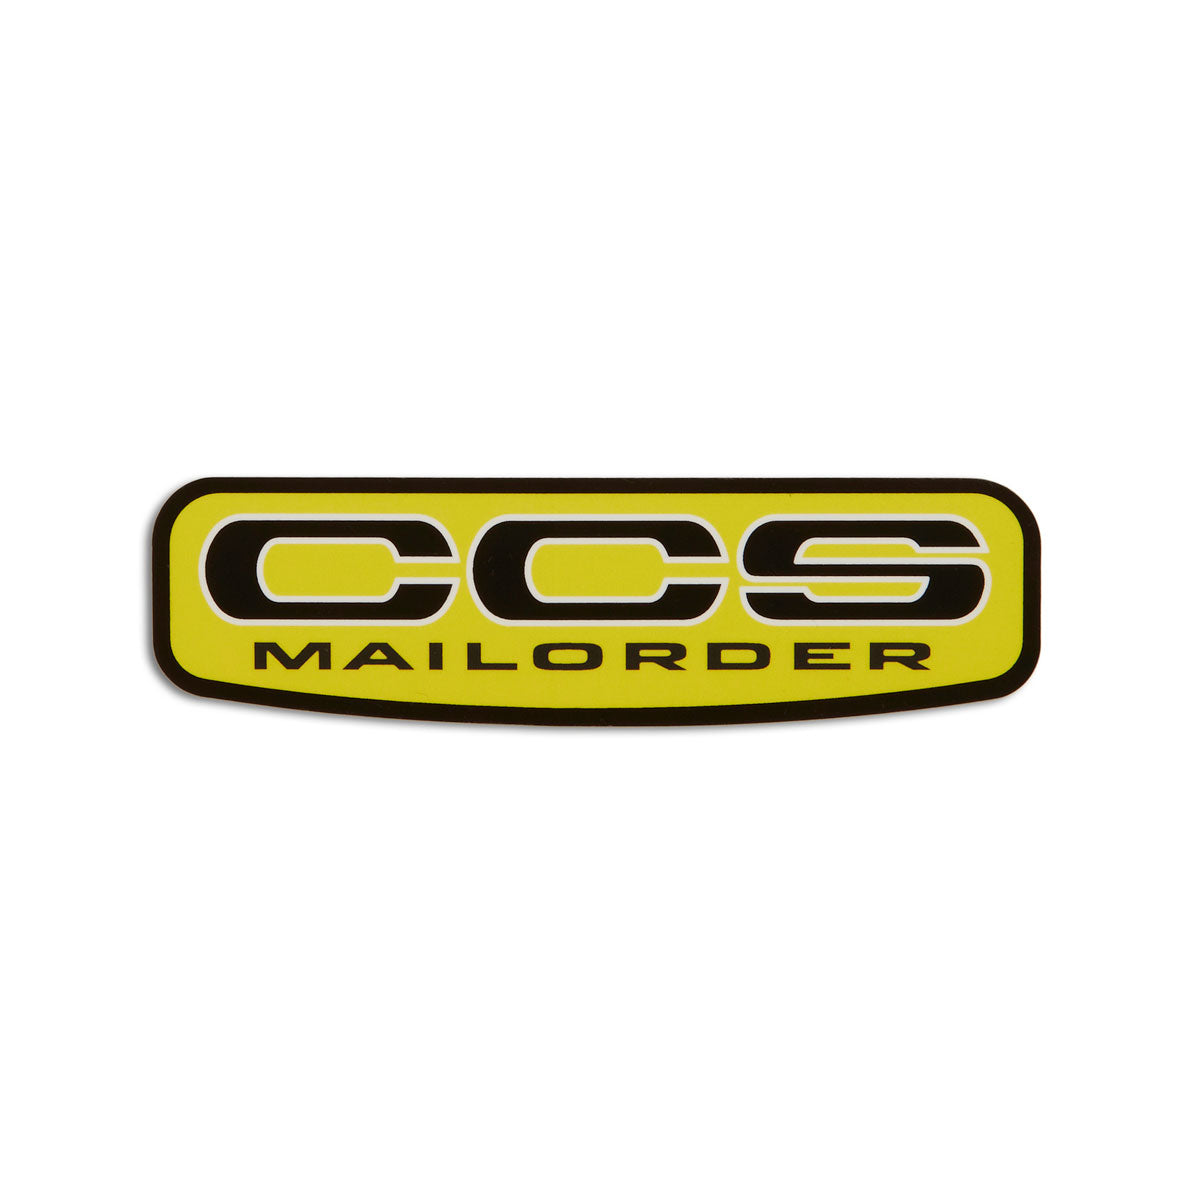 CCS Mailorder Logo Stickers - Yellow/White/Black image 1